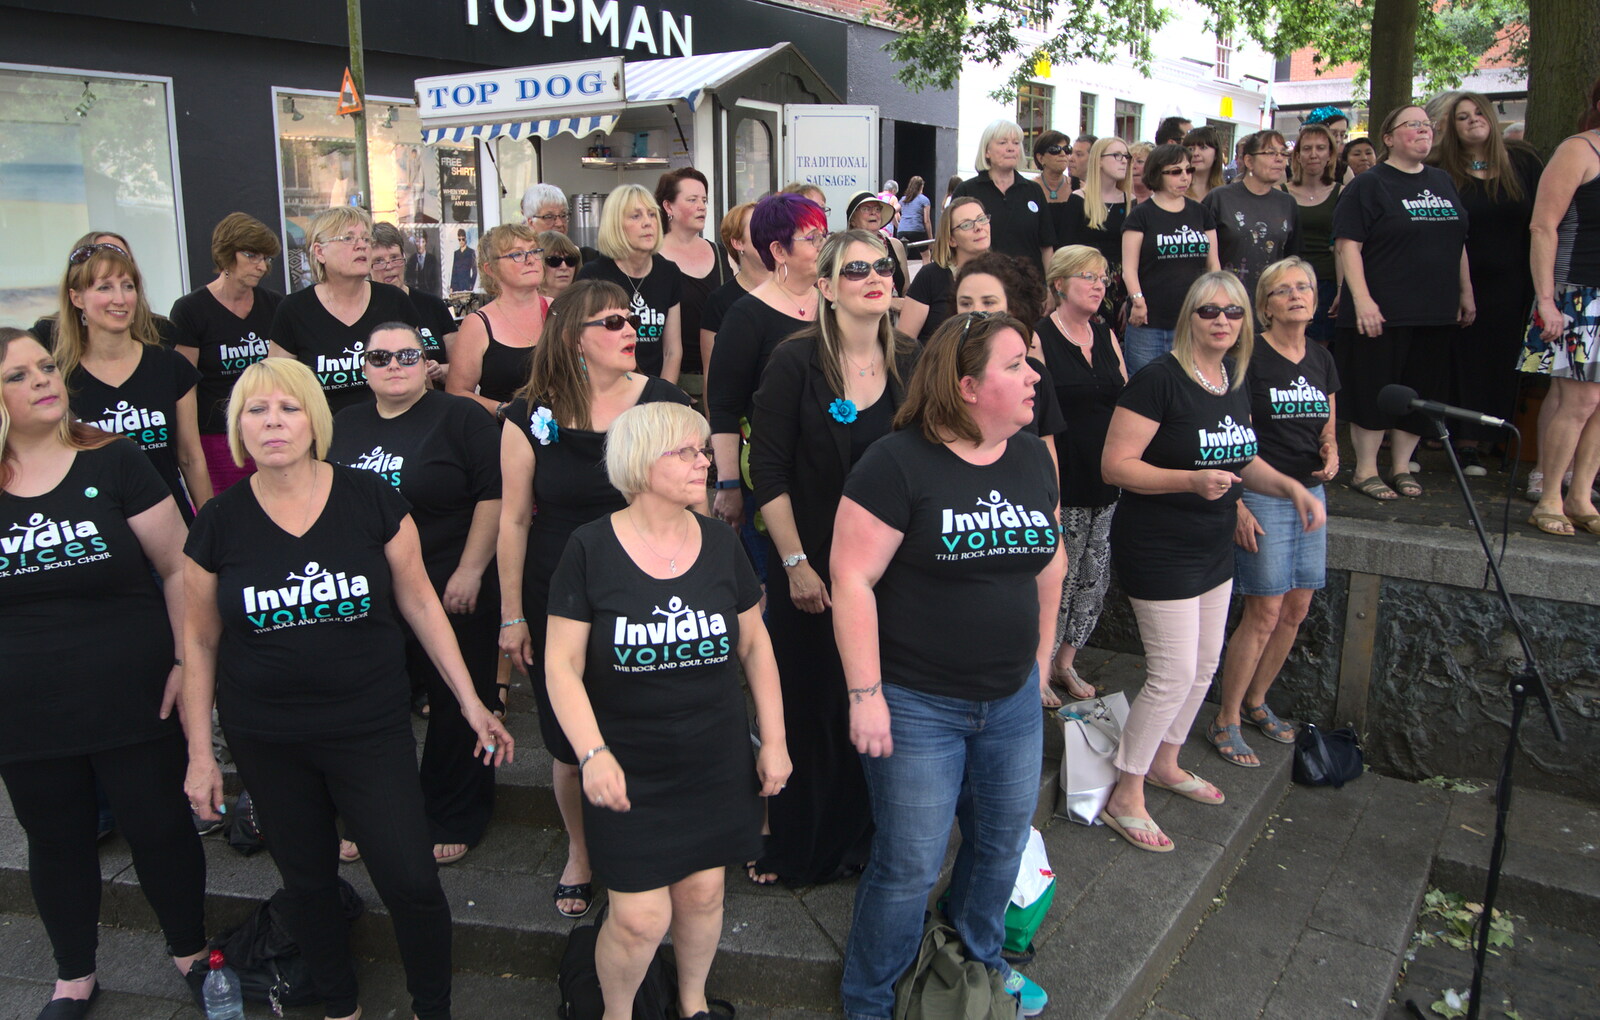 The choir outside TopShop and TopMan from Isobel's Choral Flash Mob, Norwich, Norfolk - 17th June 2017